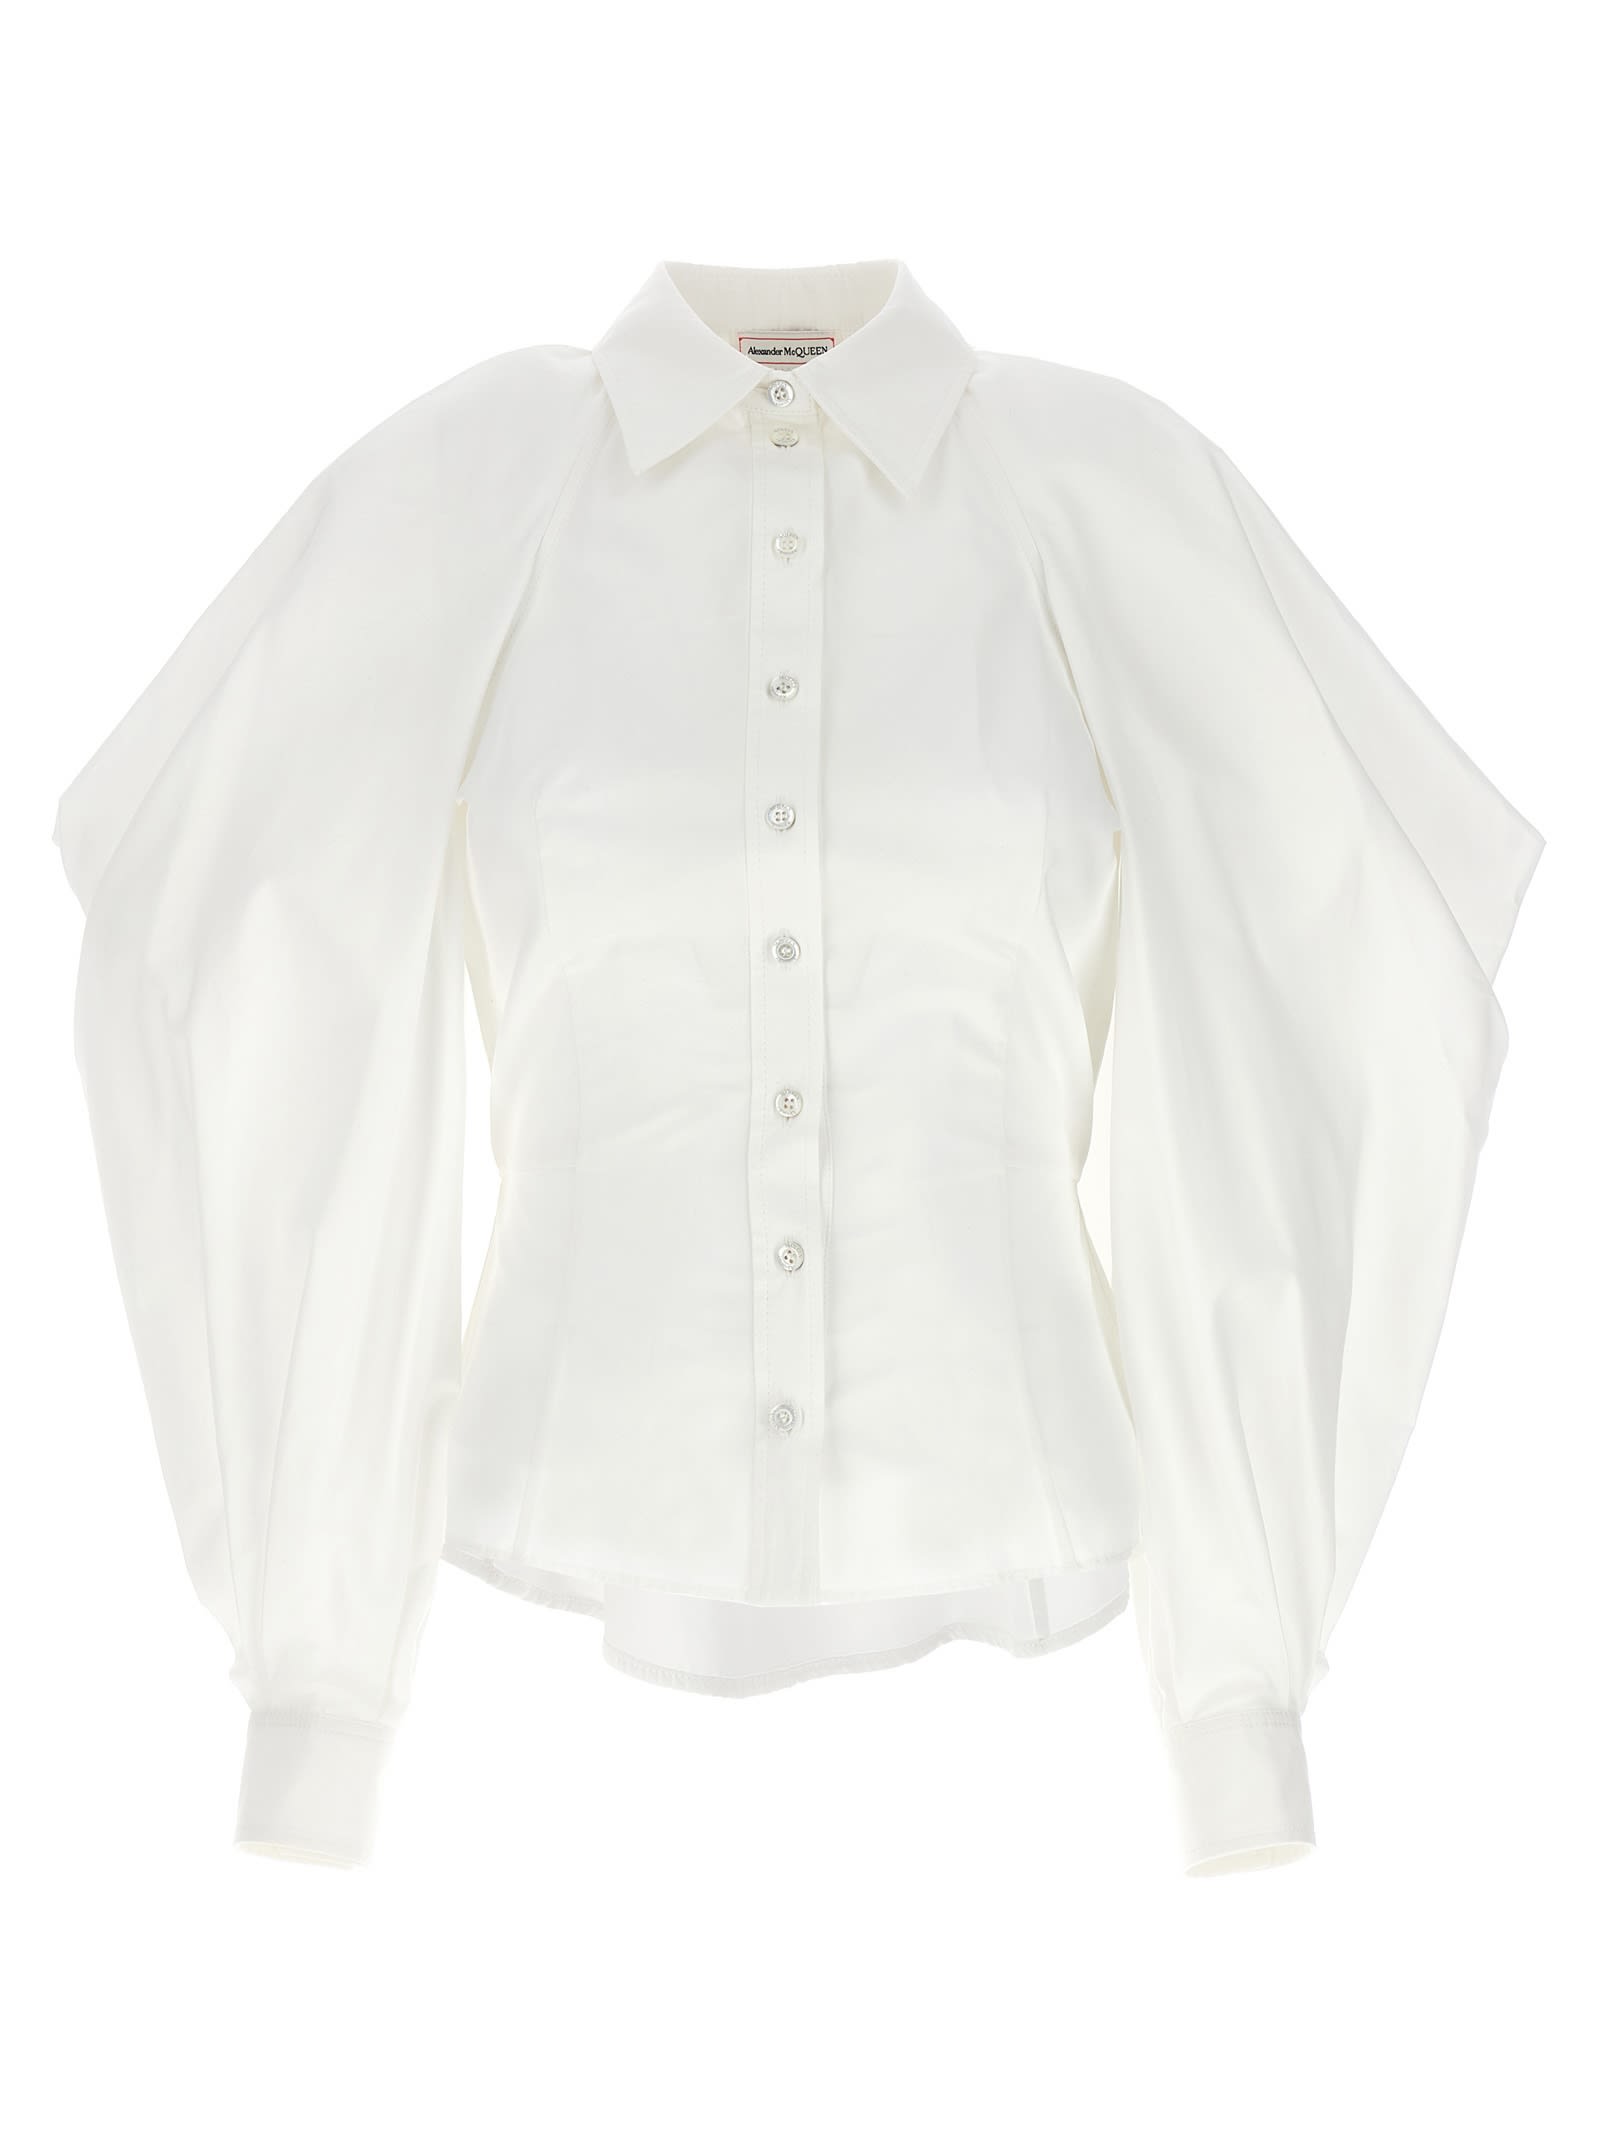 ALEXANDER MCQUEEN SHIRT WITH DRAPED SLEEVES AND CUT-OUT IN OPTICAL WHITE